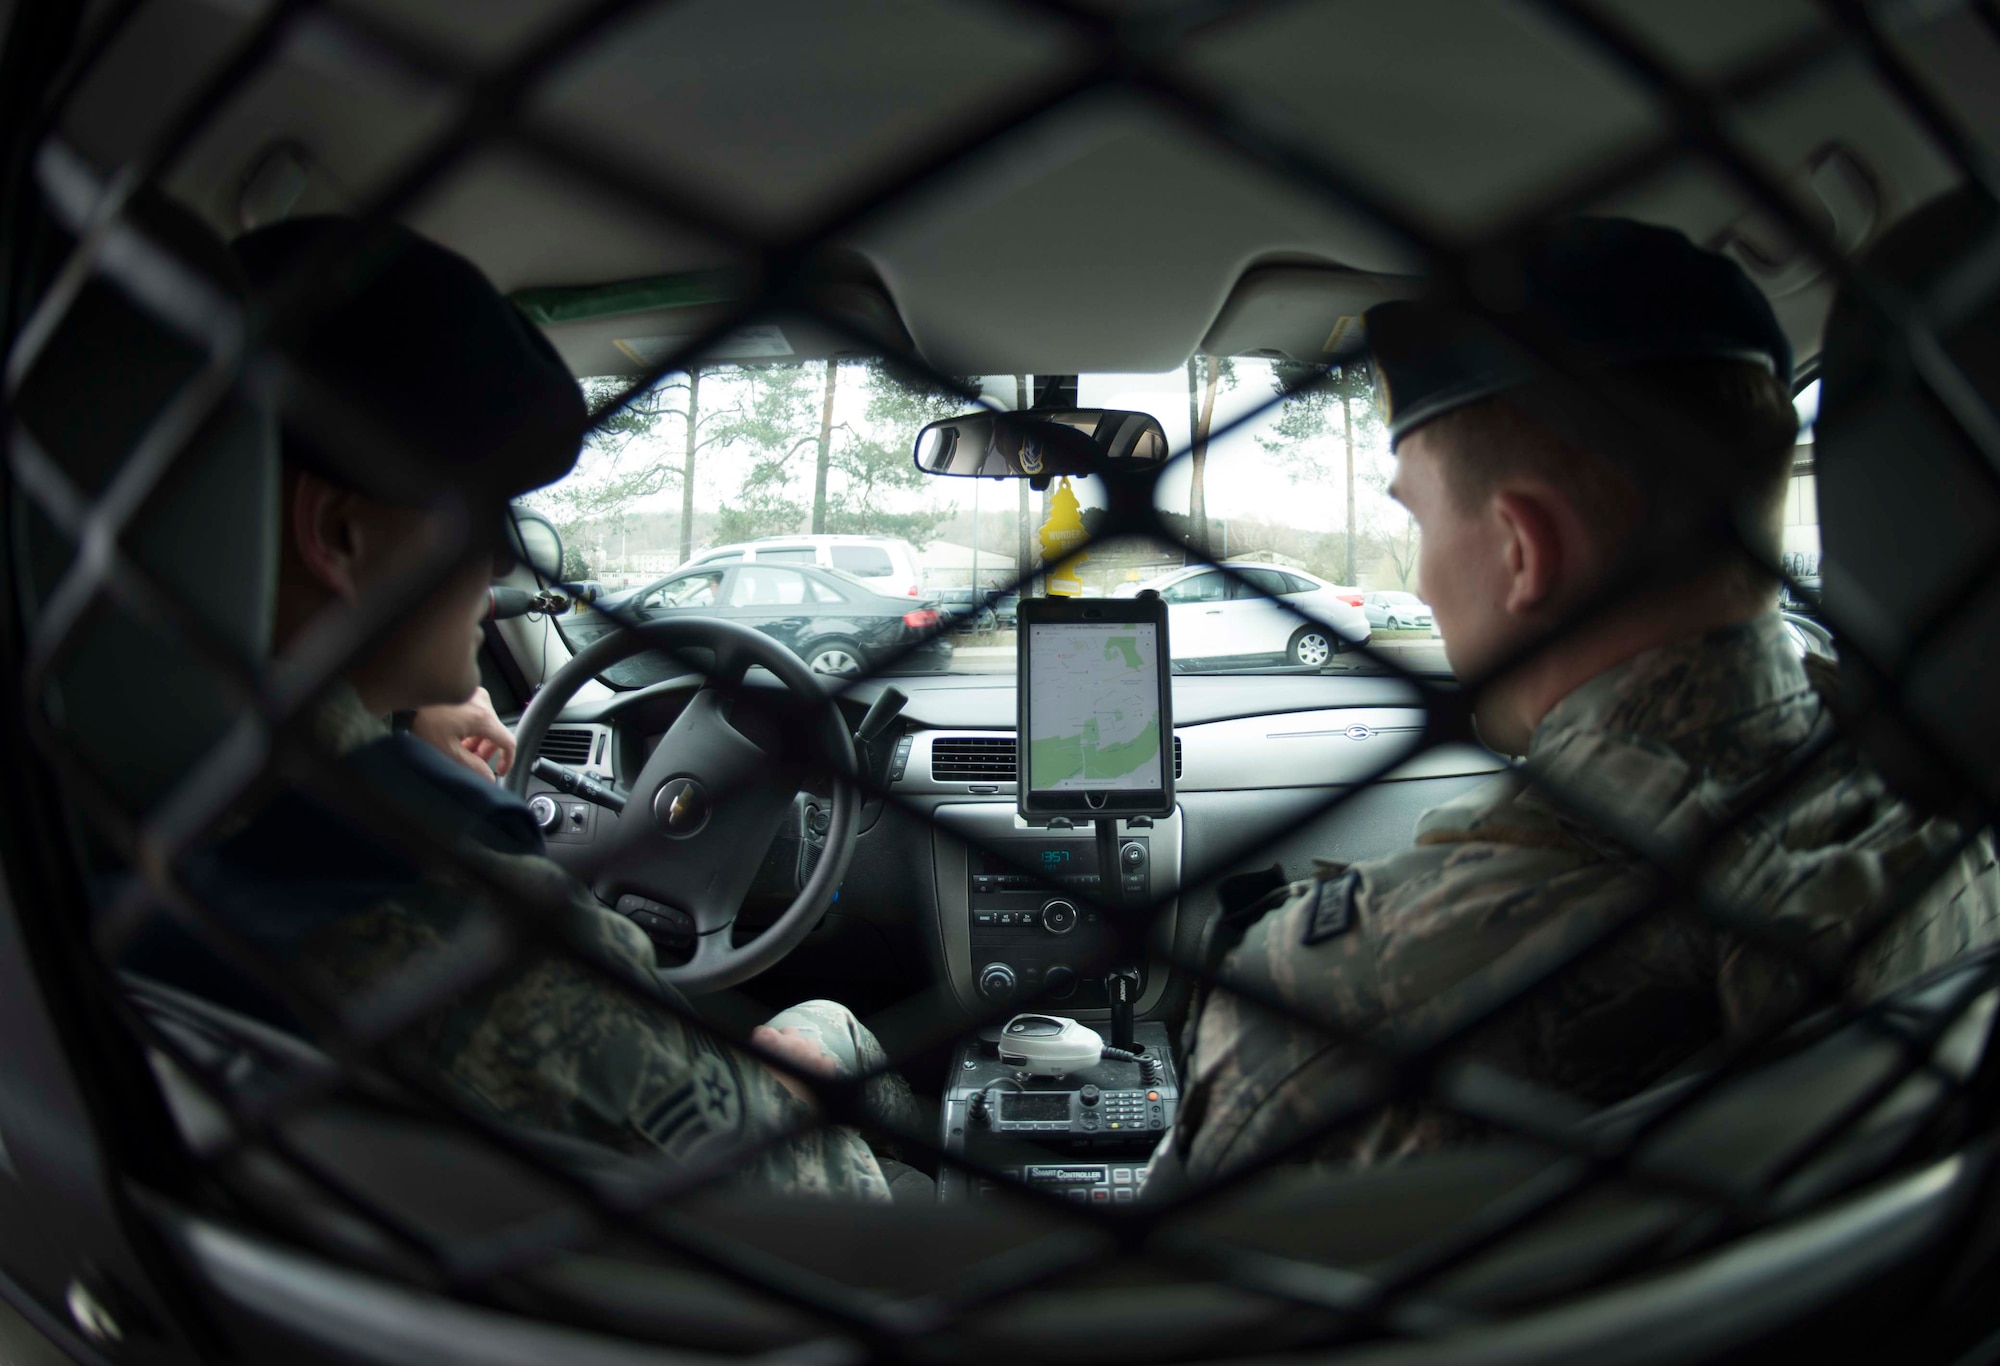 U.S. Air Force Staff Sgt. Ian Metcalf, left, and Senior Airman Nicholas Miller, 569th United States Forces Police Squadron desk patrolmen, use a tablet and satellite tracking application to locate other patrolmen on Vogelweh Military Complex, Germany, March 9, 2018. The 569th USFPS uses tablets installed with three applications to locate the nearest patrolman to an incident and notify them, cutting response time. That saves money, hours, and, most importantly, lives. (U.S. Air Force photo by Senior Airman Elizabeth Baker)